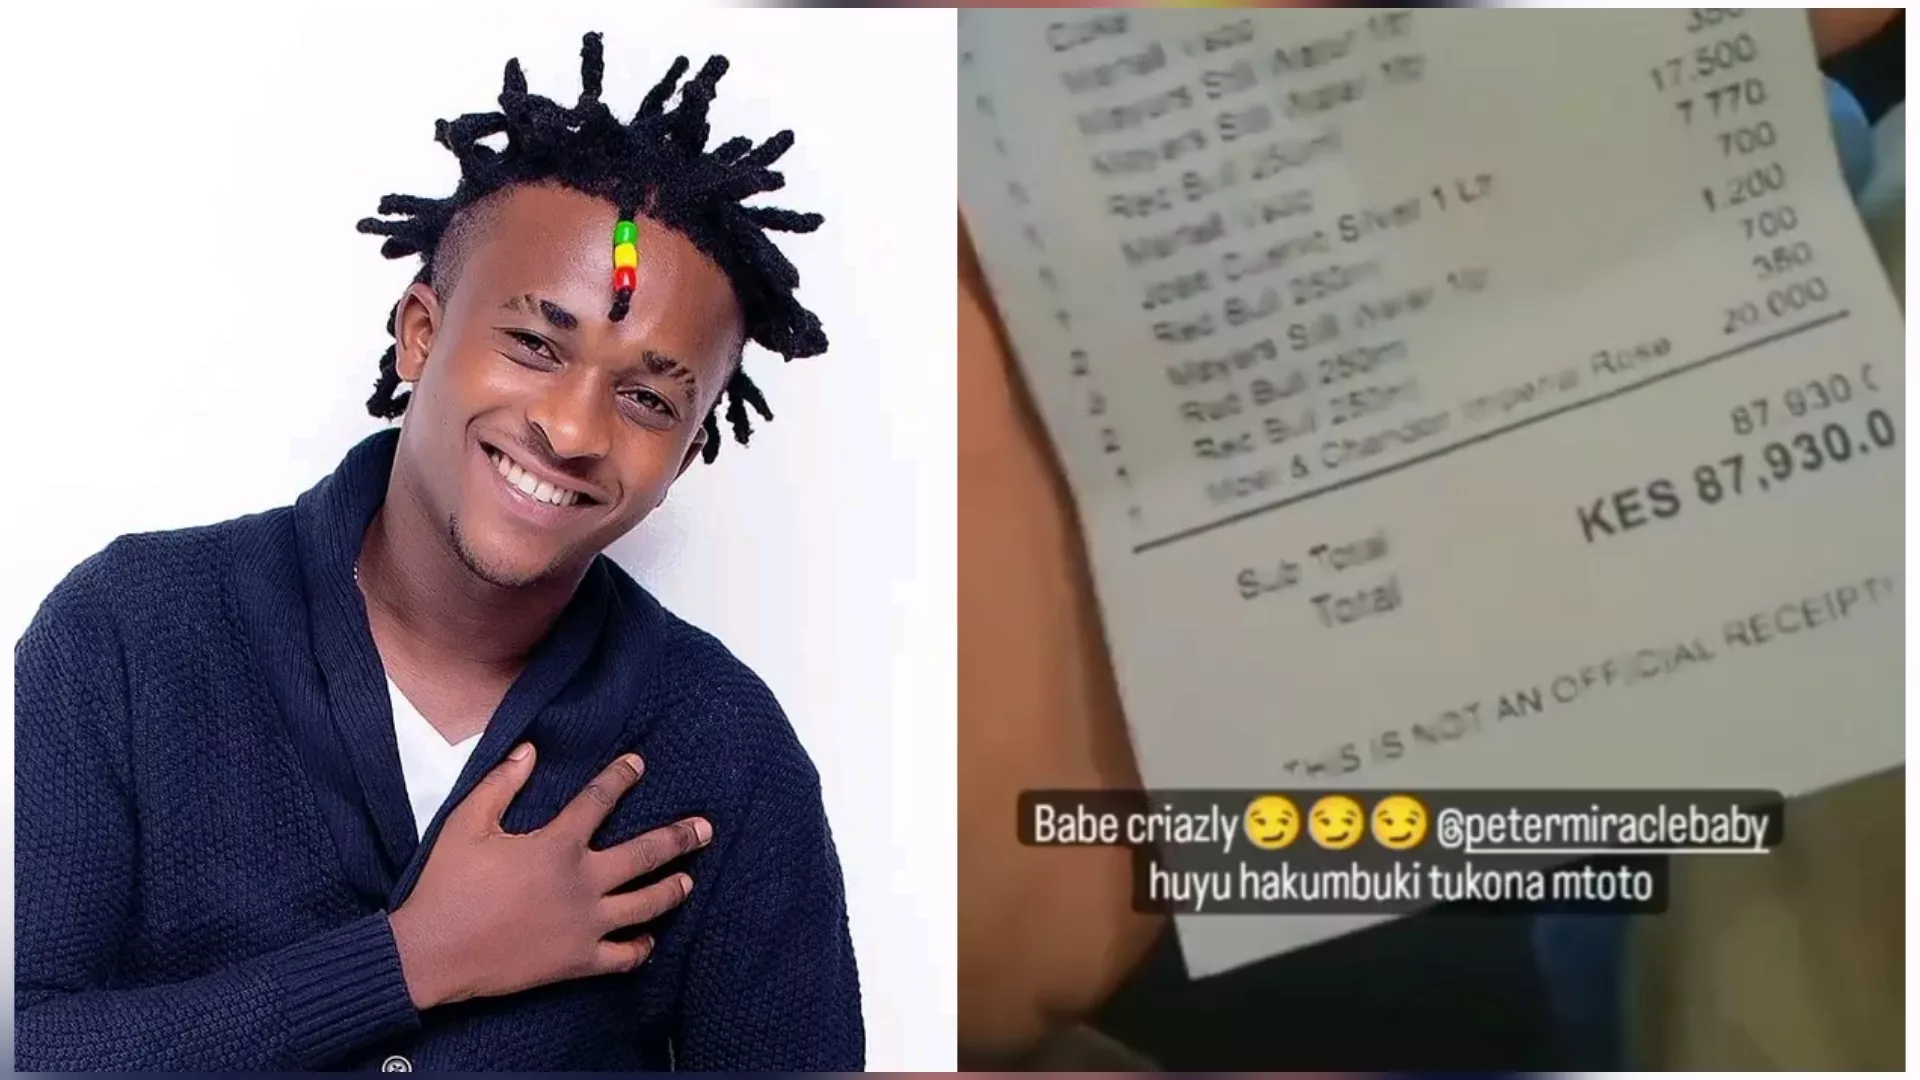 Kenyan Mugithi and gengetone artist Peter Miracle Baby is a lover of good things in life and he is not afraid to show it on social media. He recently left fans in shock after flaunted a bill of Ksh. 87,930. The singer spent the huge cash after a night out with friends. In a video shared by his girlfriend Carol Katrue, Miracle Baby says he had to spend since his friends were around. "Baby yaani hizi ndio pesa ulitumia jana?" Carol Katrue wondered wondered why her hubby would spend huge amount of cash yet they a baby to take care of. Peter however defended the expenditure by saying that; " Eeeh kwani. Si nilaaikuwa na mabeshte zangu?" Fans on social media have expressed their disappointment in his actions seeing that last year, Katrue took to her socials asking Peter's fans to help raise Ksh 300K for him to undergo surgery to unblock his intestines. "Hae guys it's a higher time to address Peter's health. The main reason is Peter's stomach has been having issues since 2018 when he had an obstruction in the intestines. He then underwent the first surgery and was successful. Recently in 2020, the stomach started aching once in a while till yesterday when it started aching frequently and we took him to Neema where he was unconscious So the only way for him to heal is to have a second surgery which is costing Ksh. 300,000." Shortly after the appeal, Katrue told Mungai Eve that they no longer needed the money since Kenyans didn't contribute as they had expected. "The cash fans sent was only 1K. We used 70K and out of that 10 K was sent by Dennis Itumbi. The other 60K ni sisi tuliprovide."